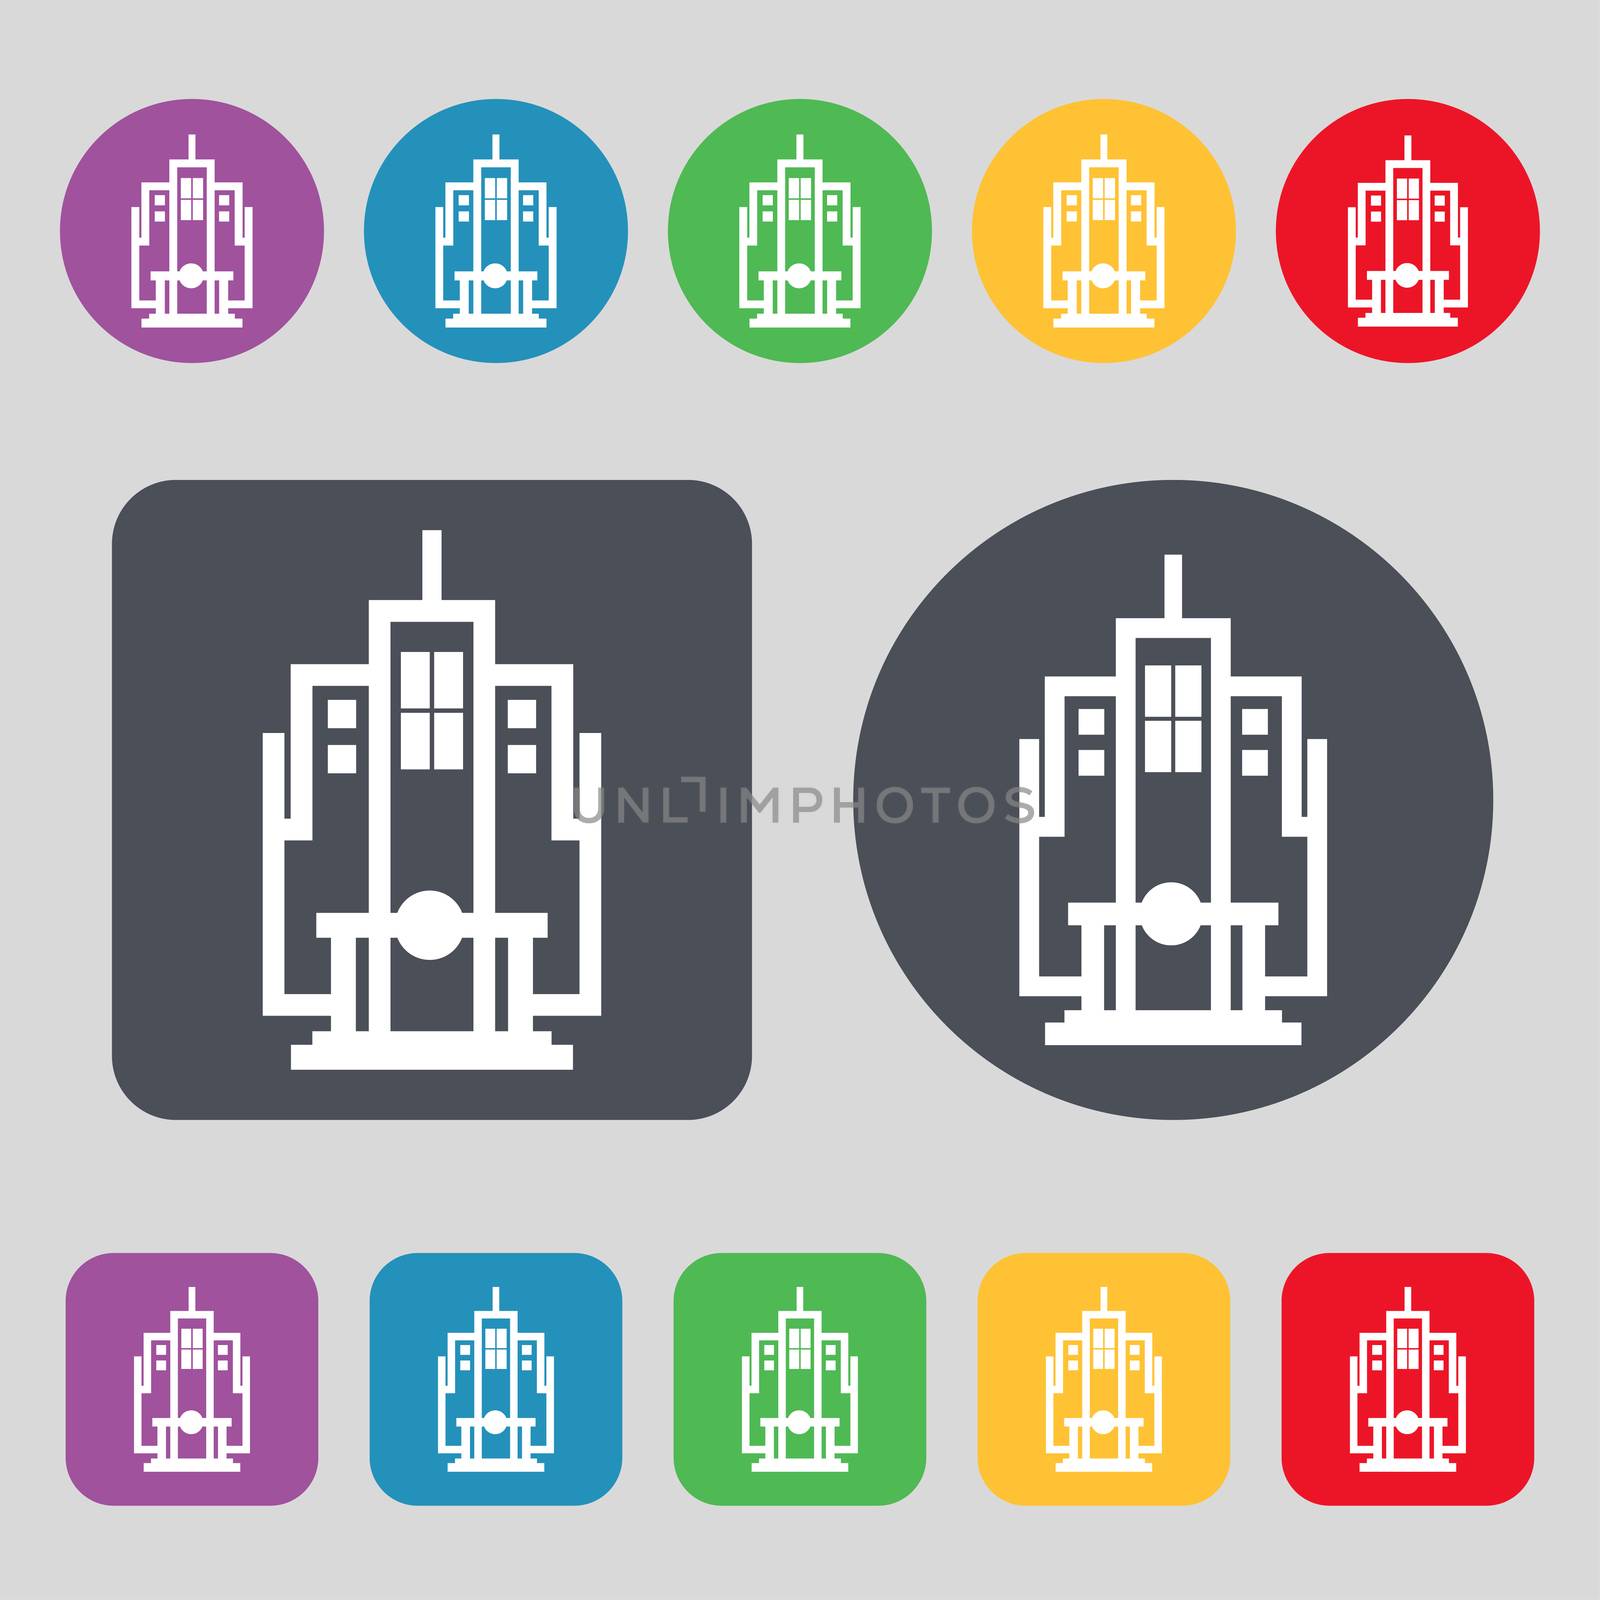 skyscraper icon sign. A set of 12 colored buttons. Flat design.  by serhii_lohvyniuk